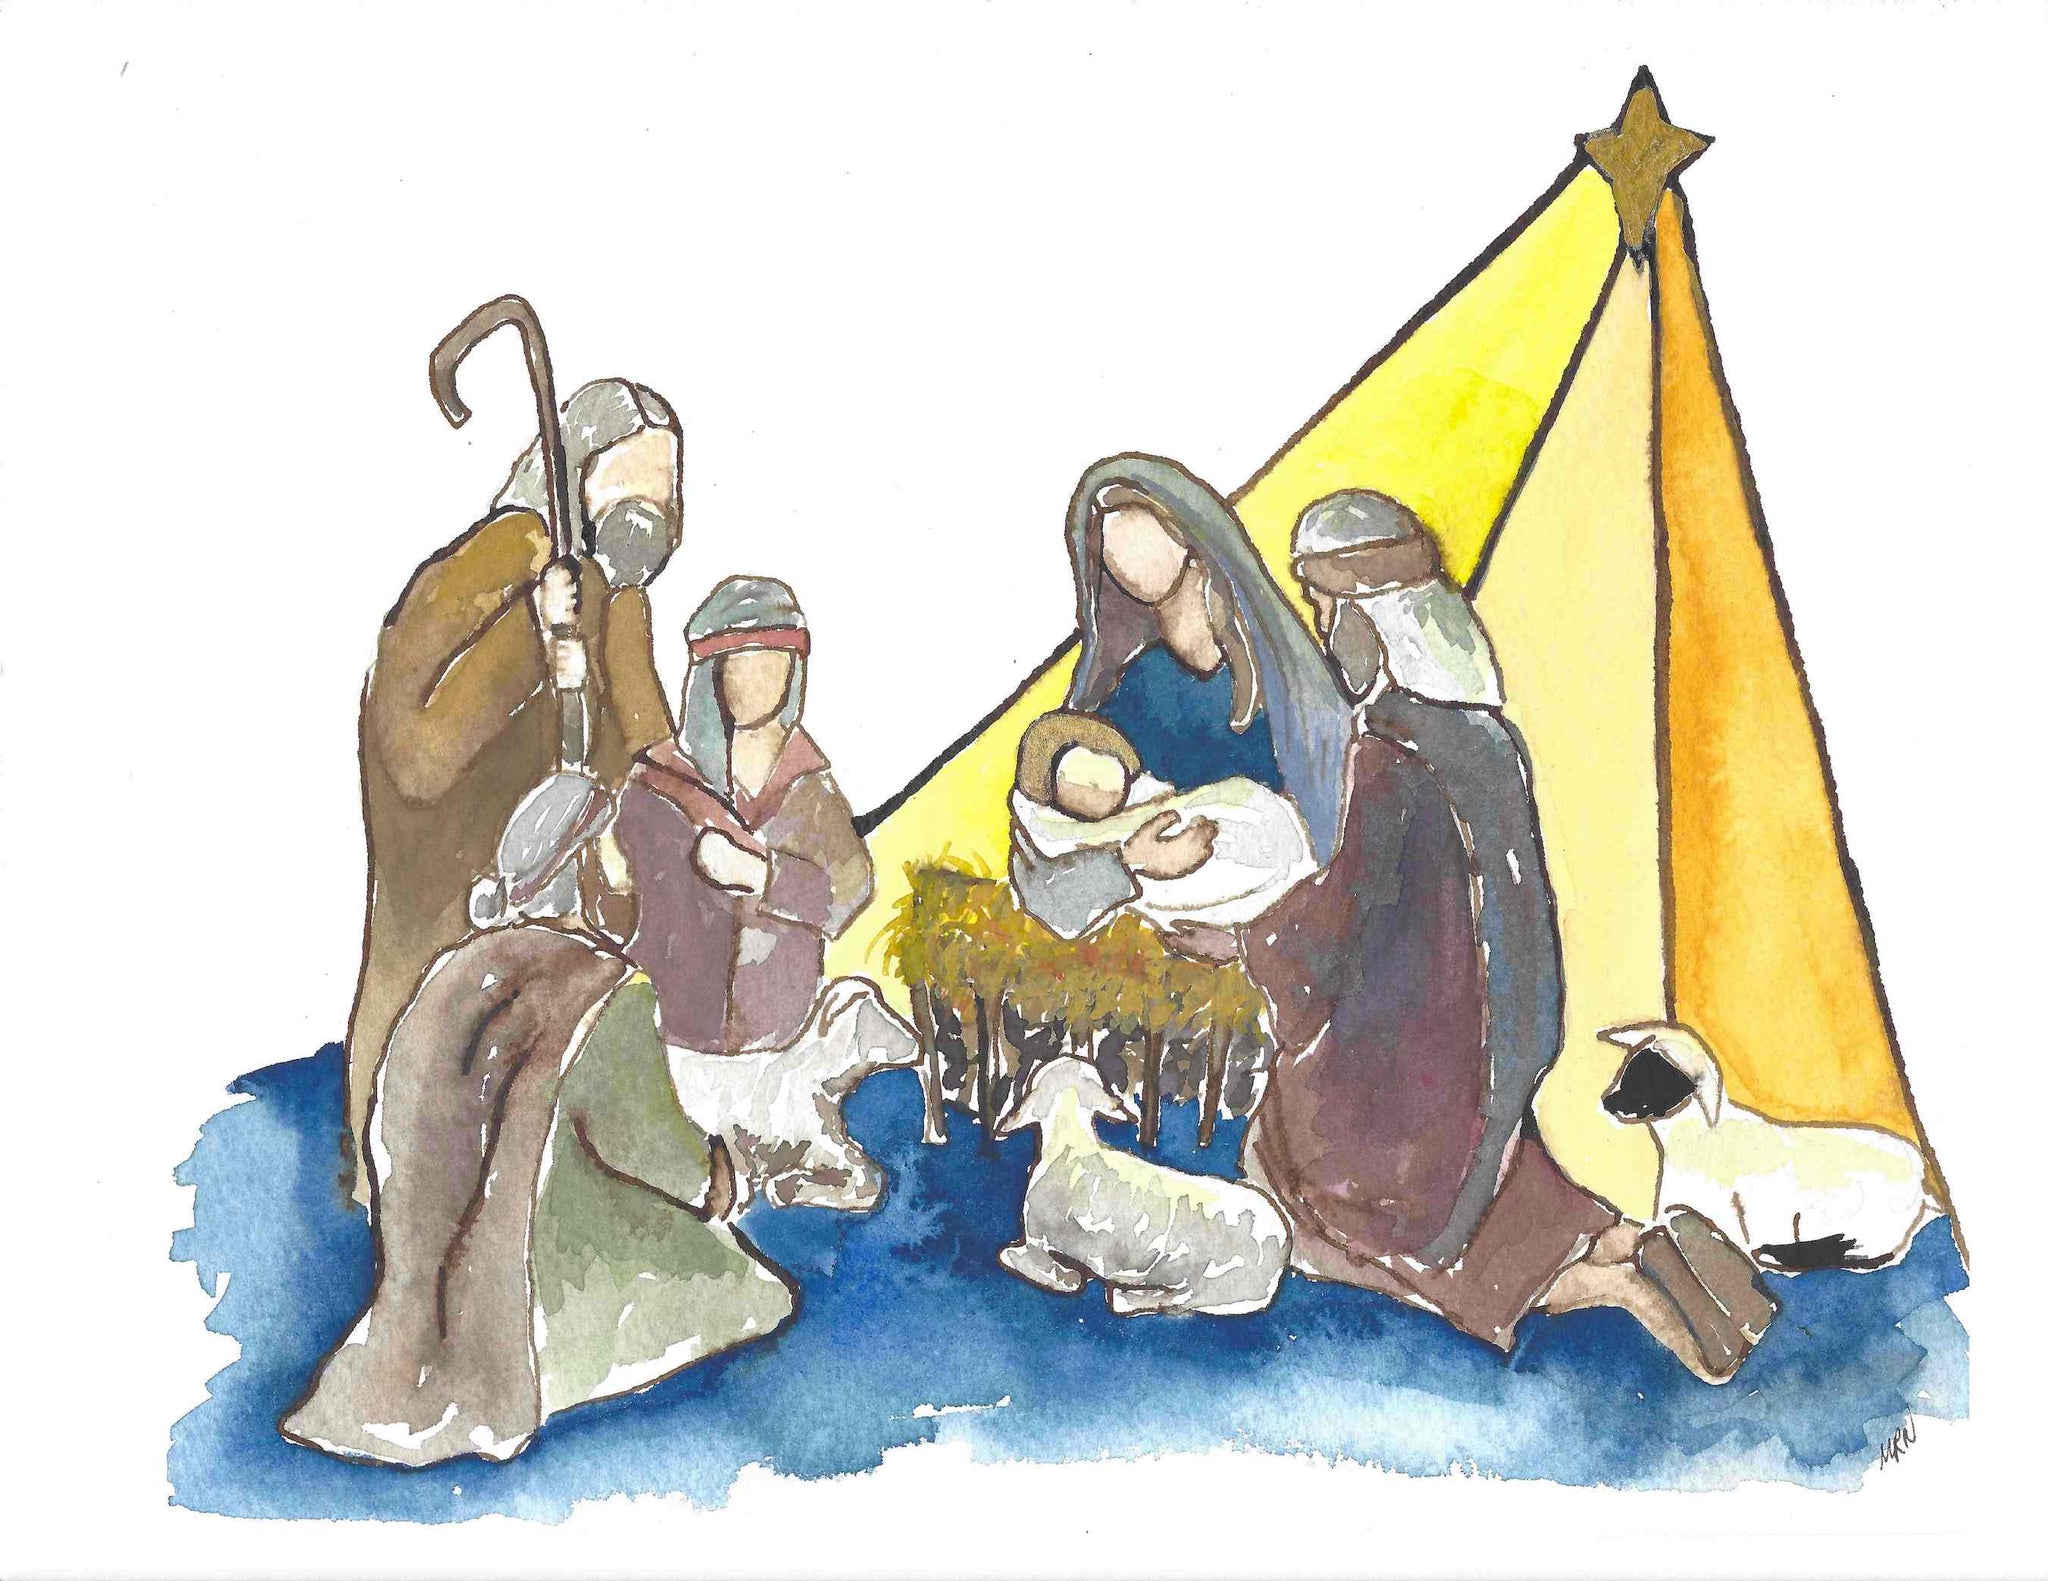 "For Unto Us a Son is Born"